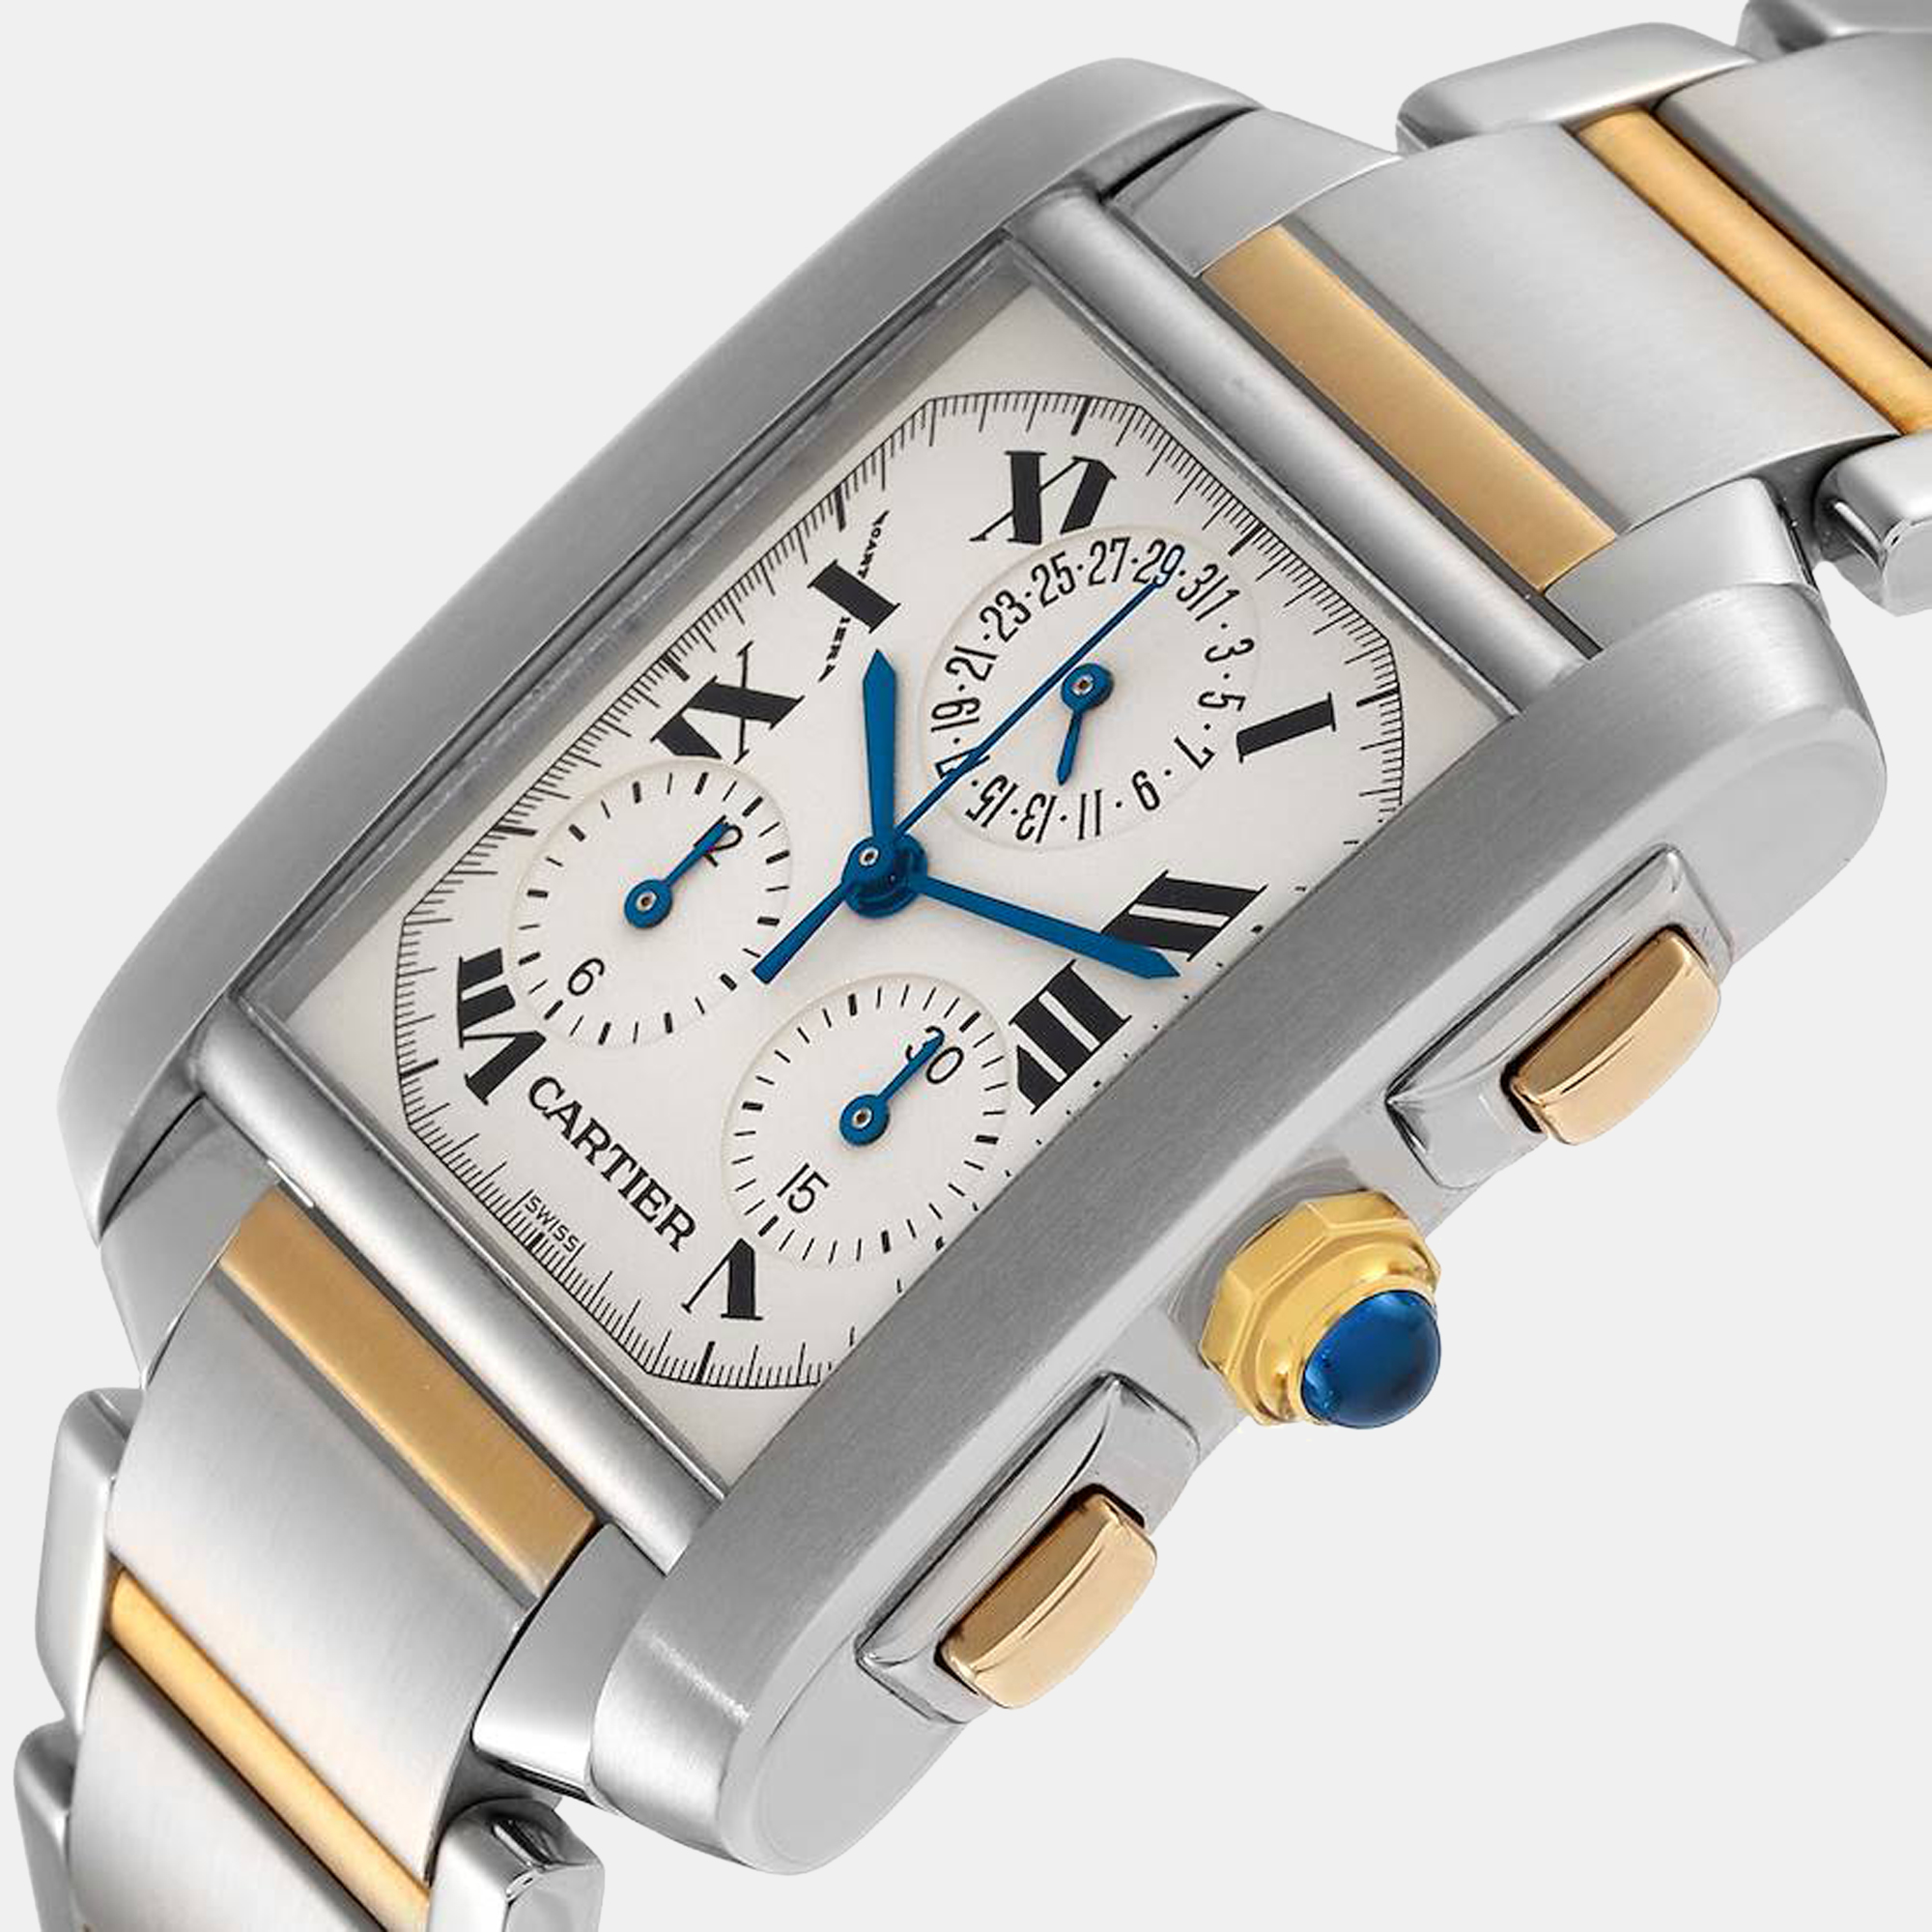 

Cartier Silver 18k Yellow Gold And Stainless Steel Tank Francaise W51004Q4 Quartz Men's Wristwatch 28 mm